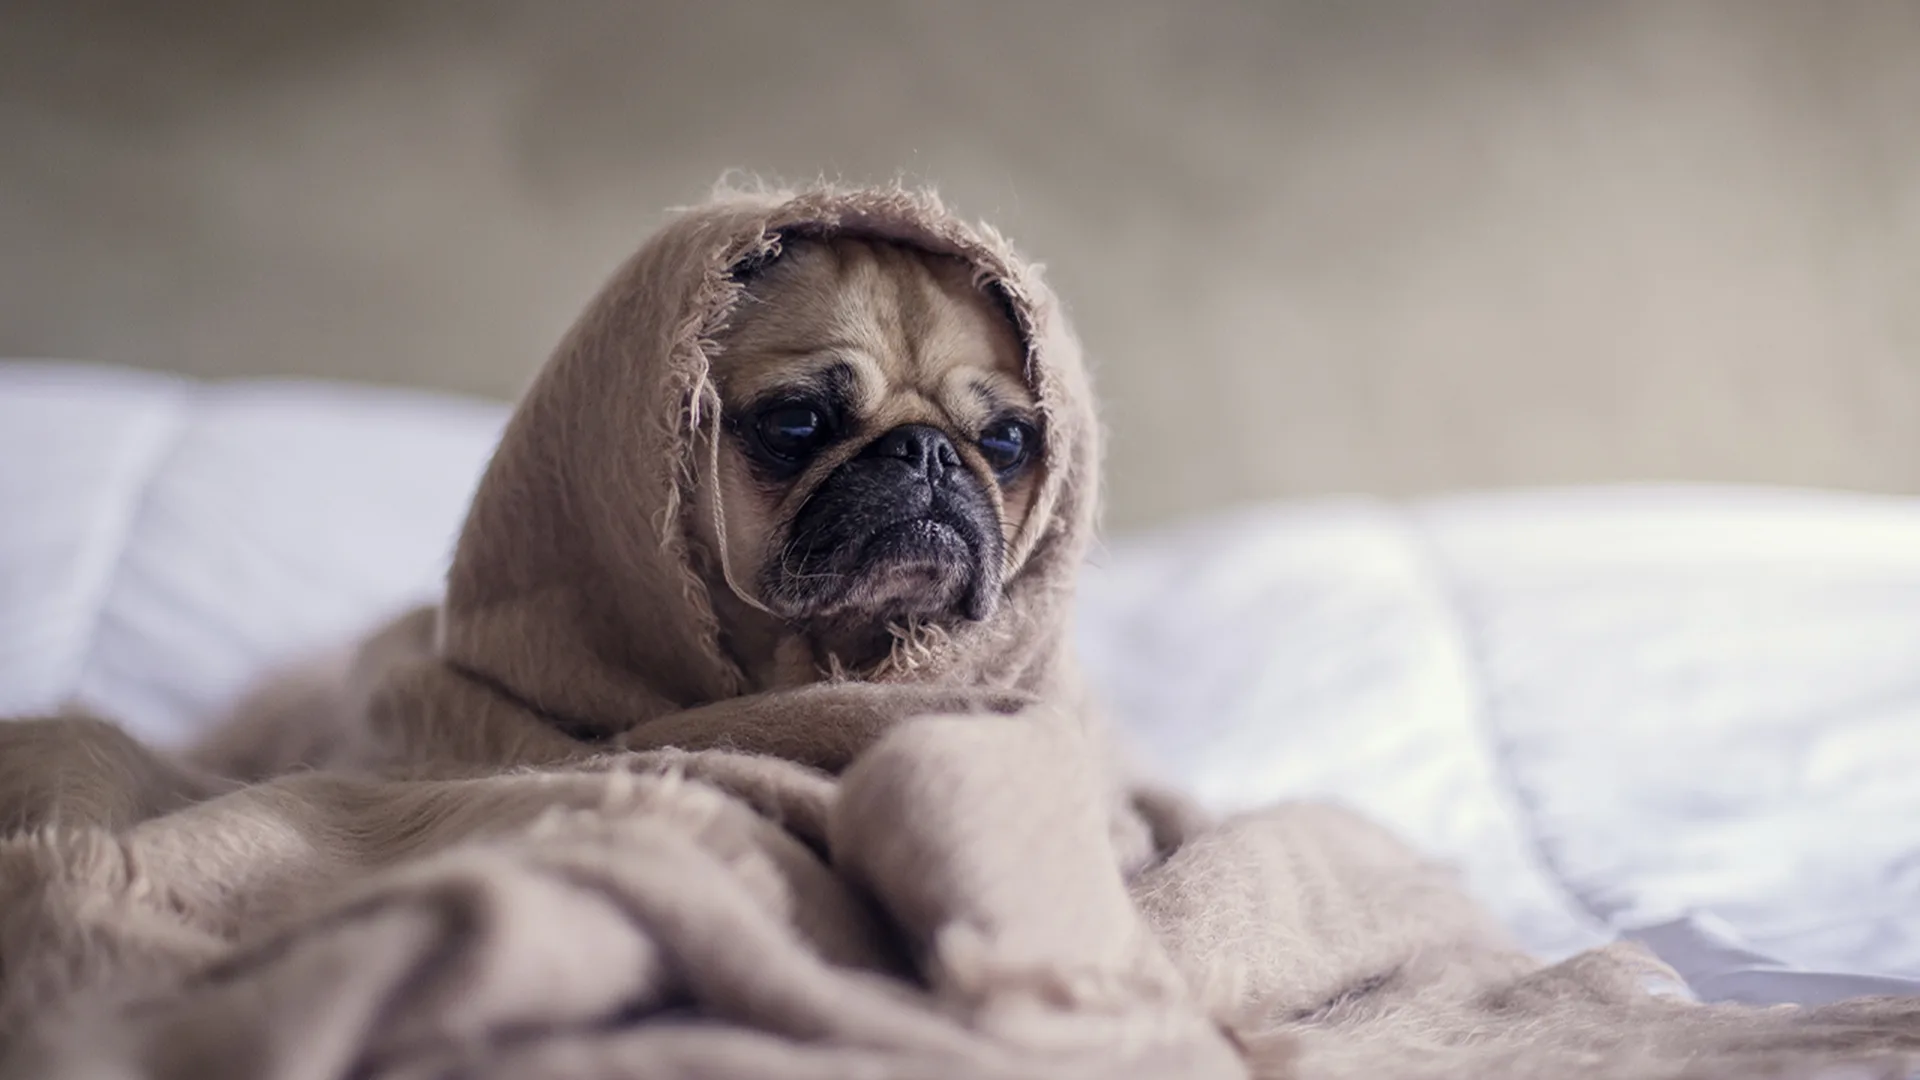 Pug in a blanket on a bed